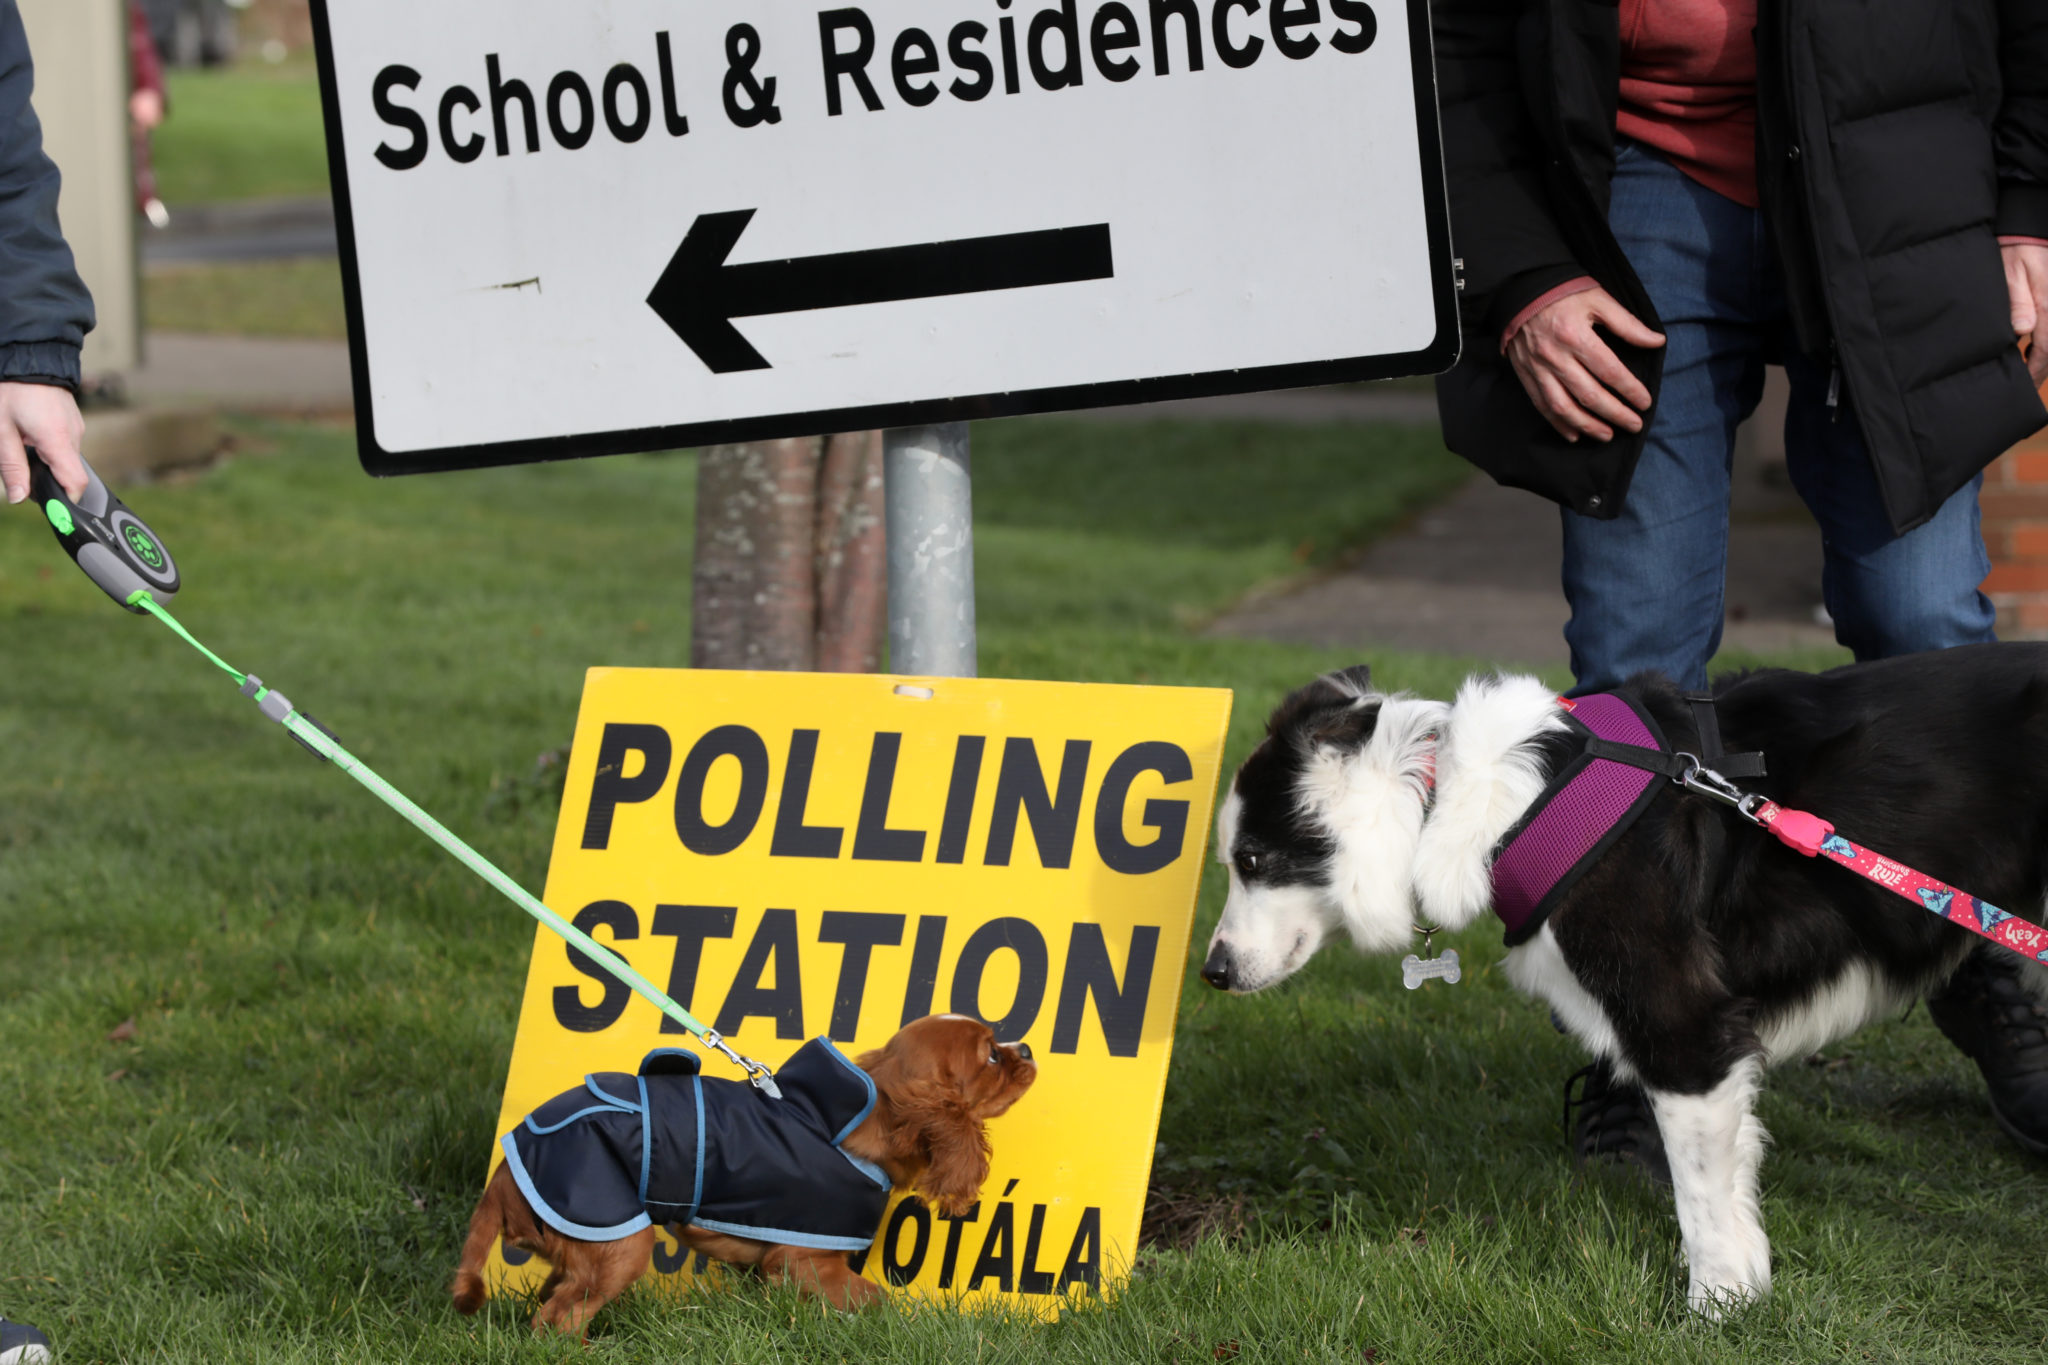 Polling stations voter turnout